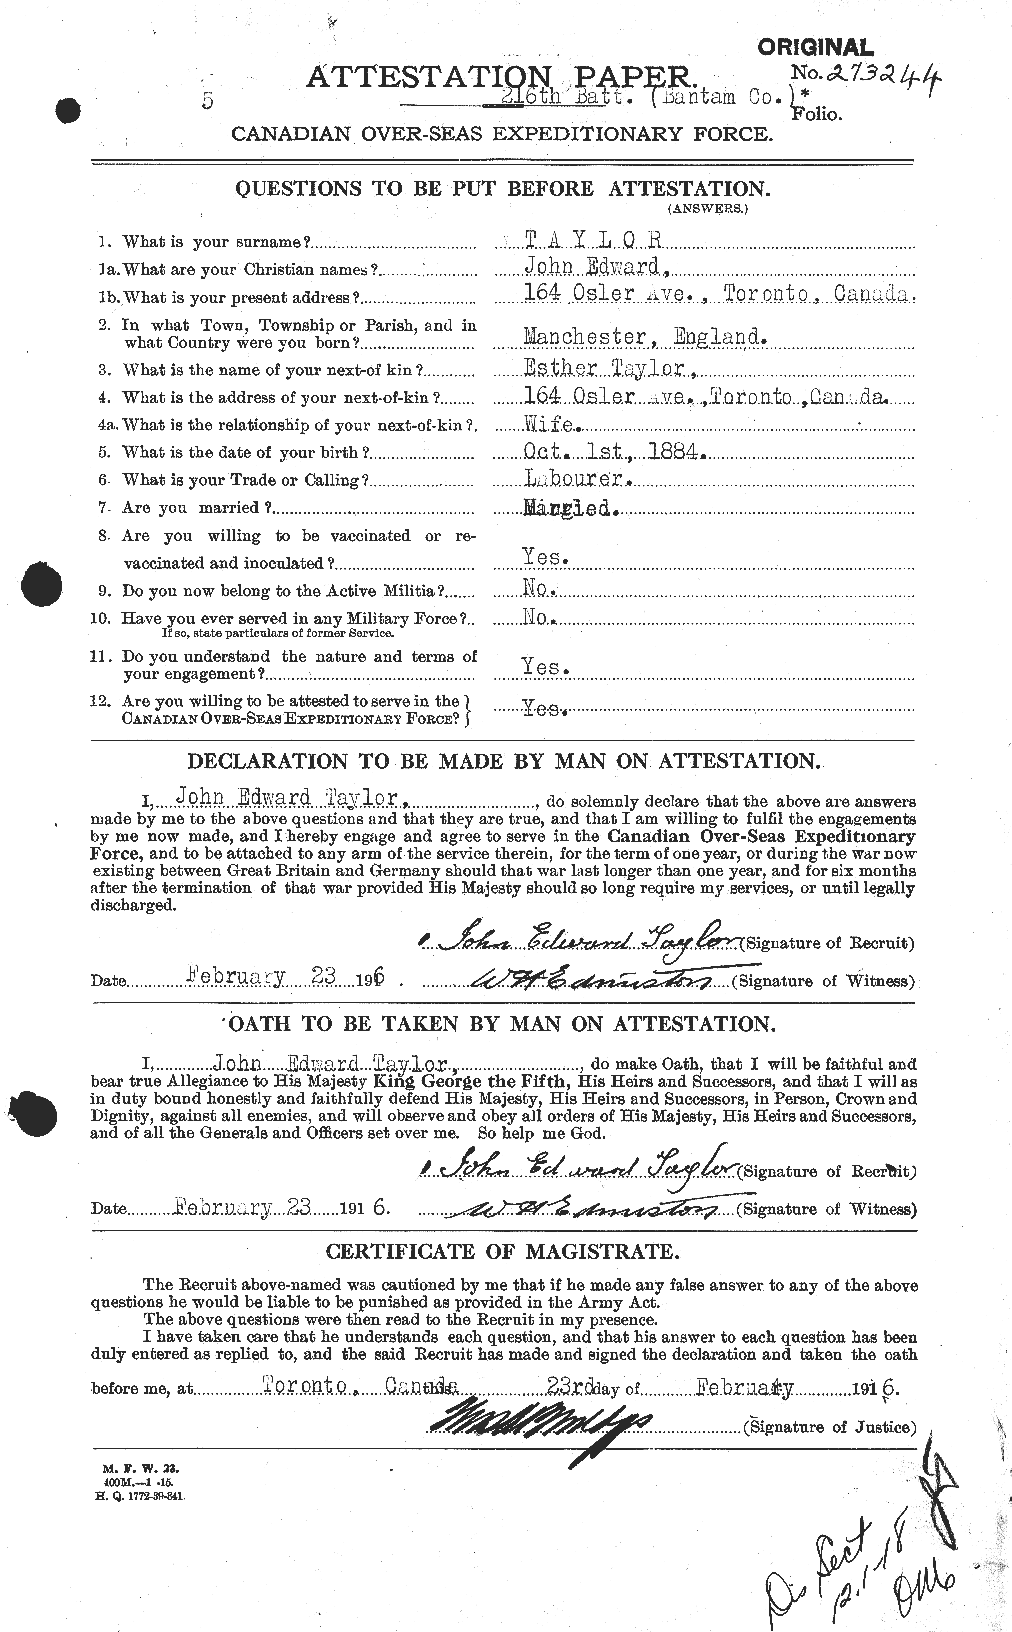 Personnel Records of the First World War - CEF 627075a